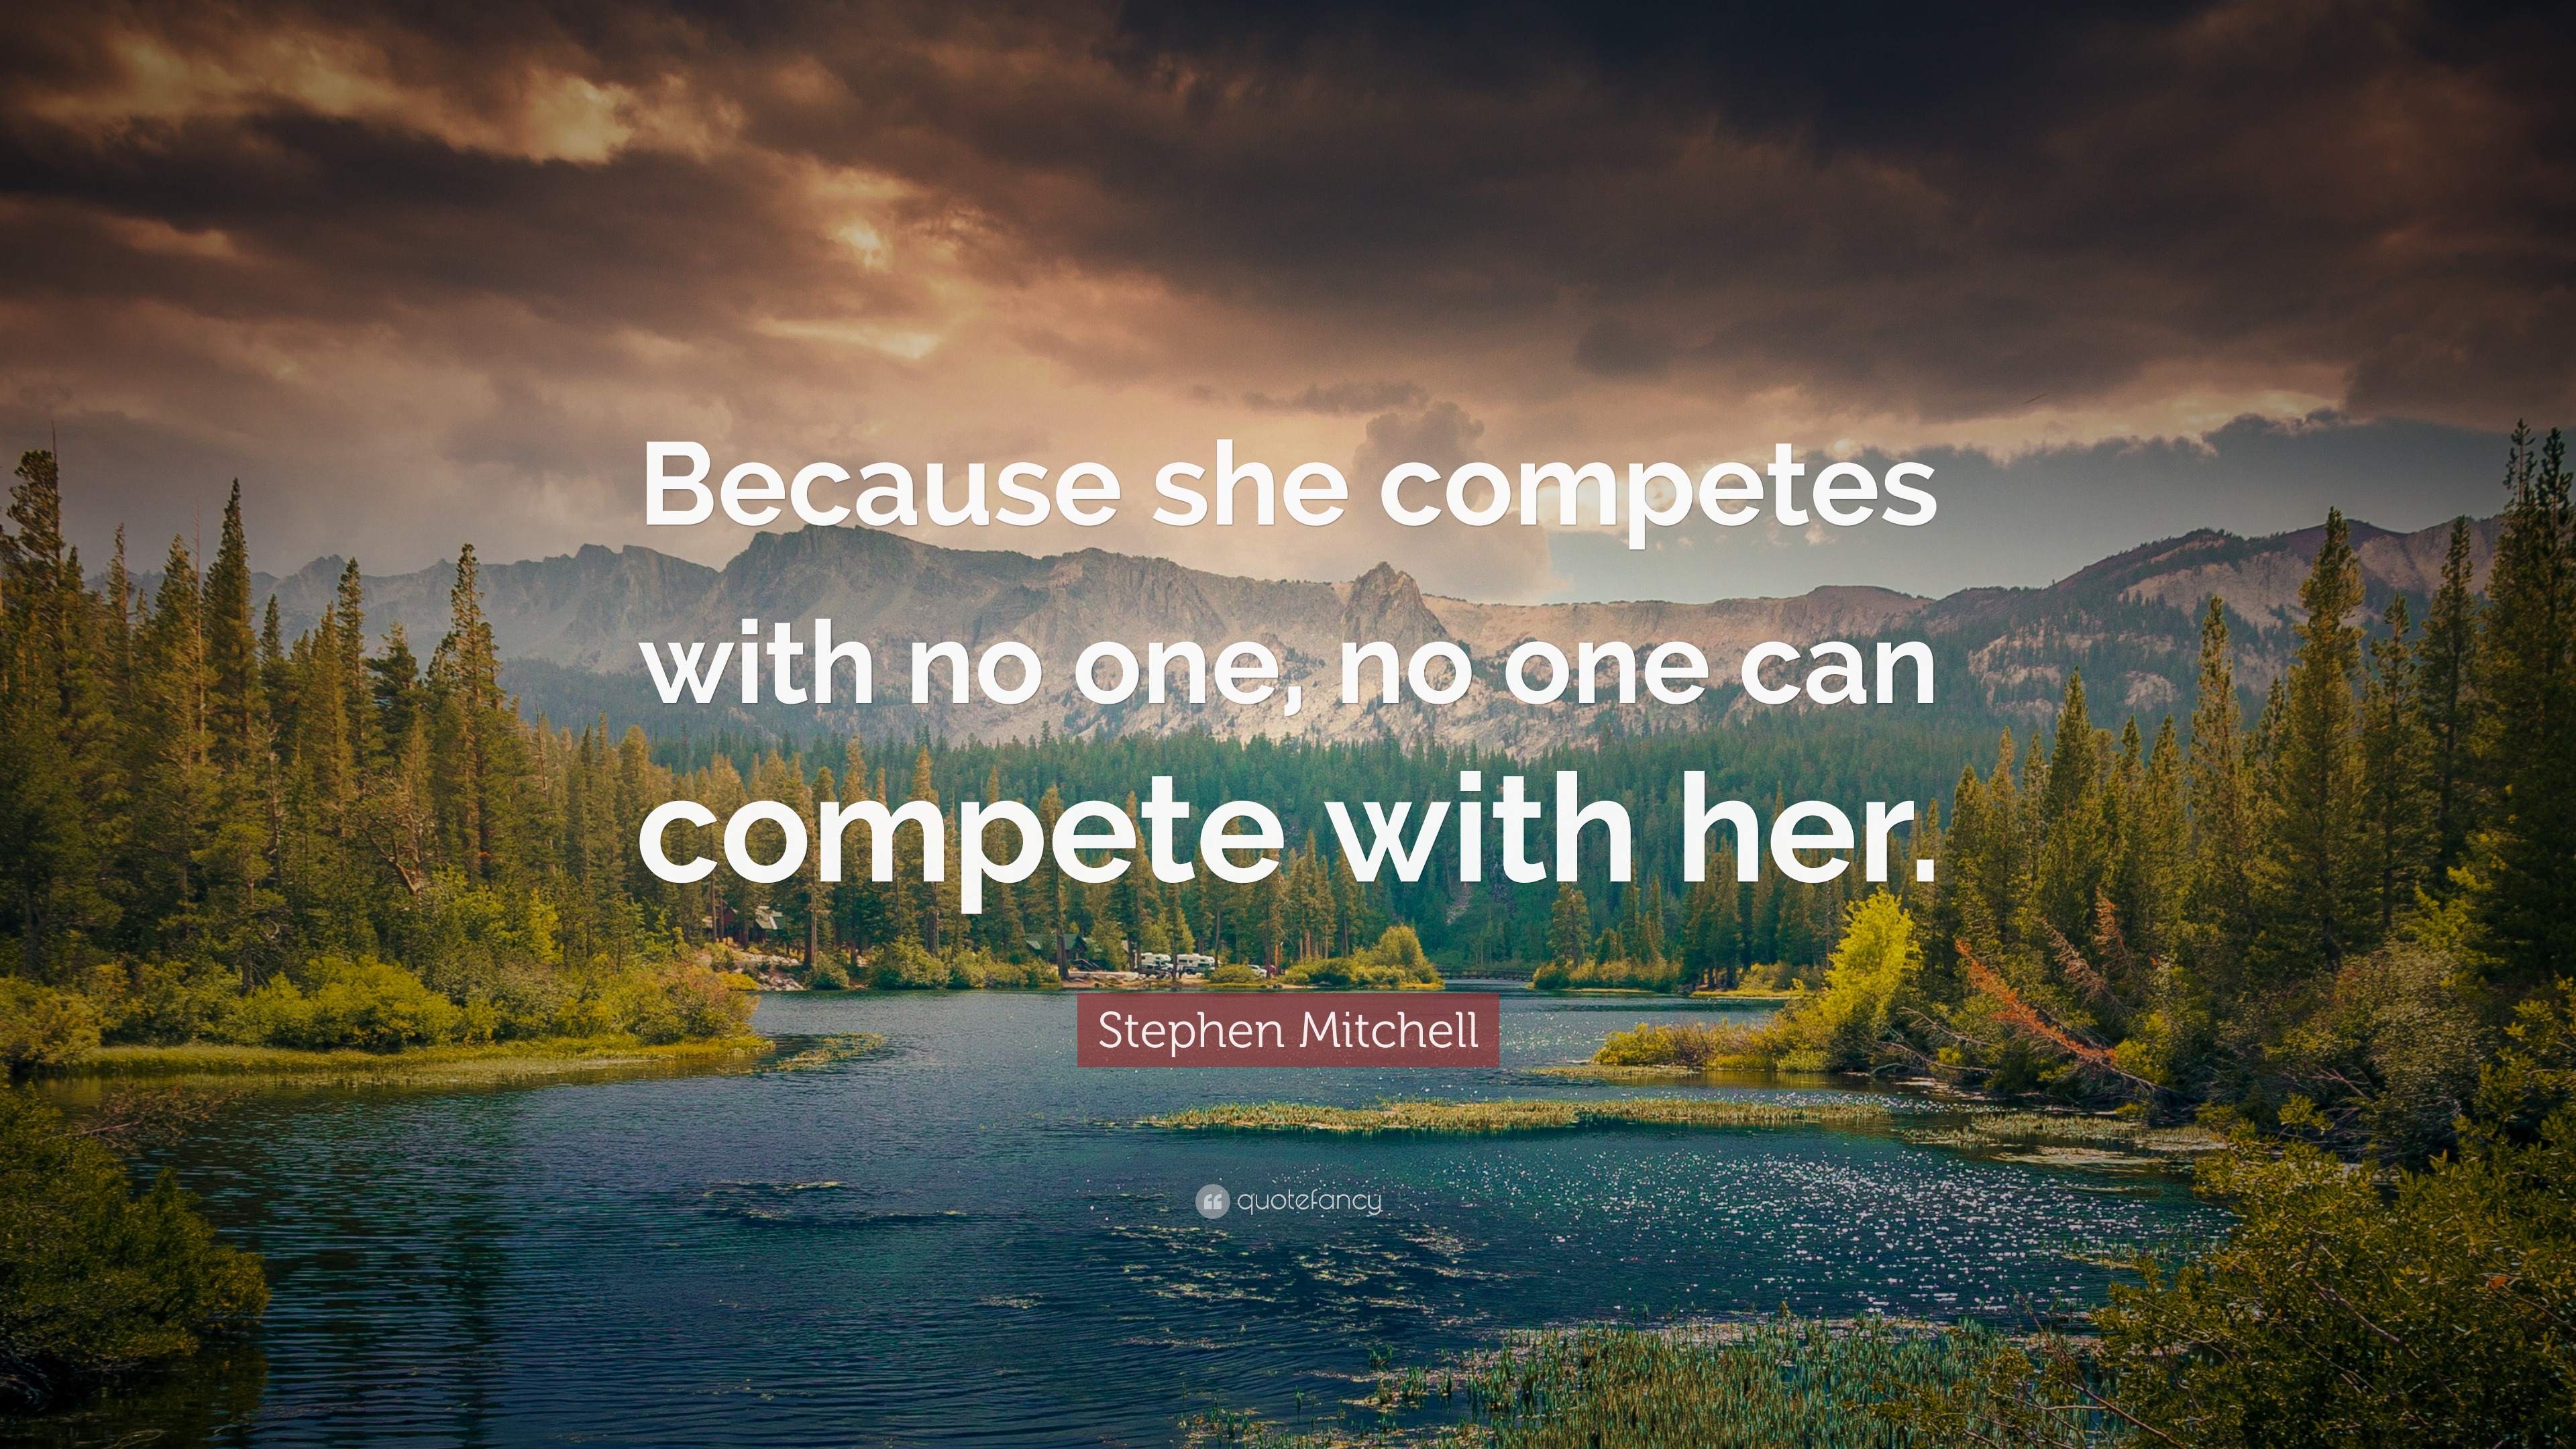 Because she competes with no one, no one can compete with her